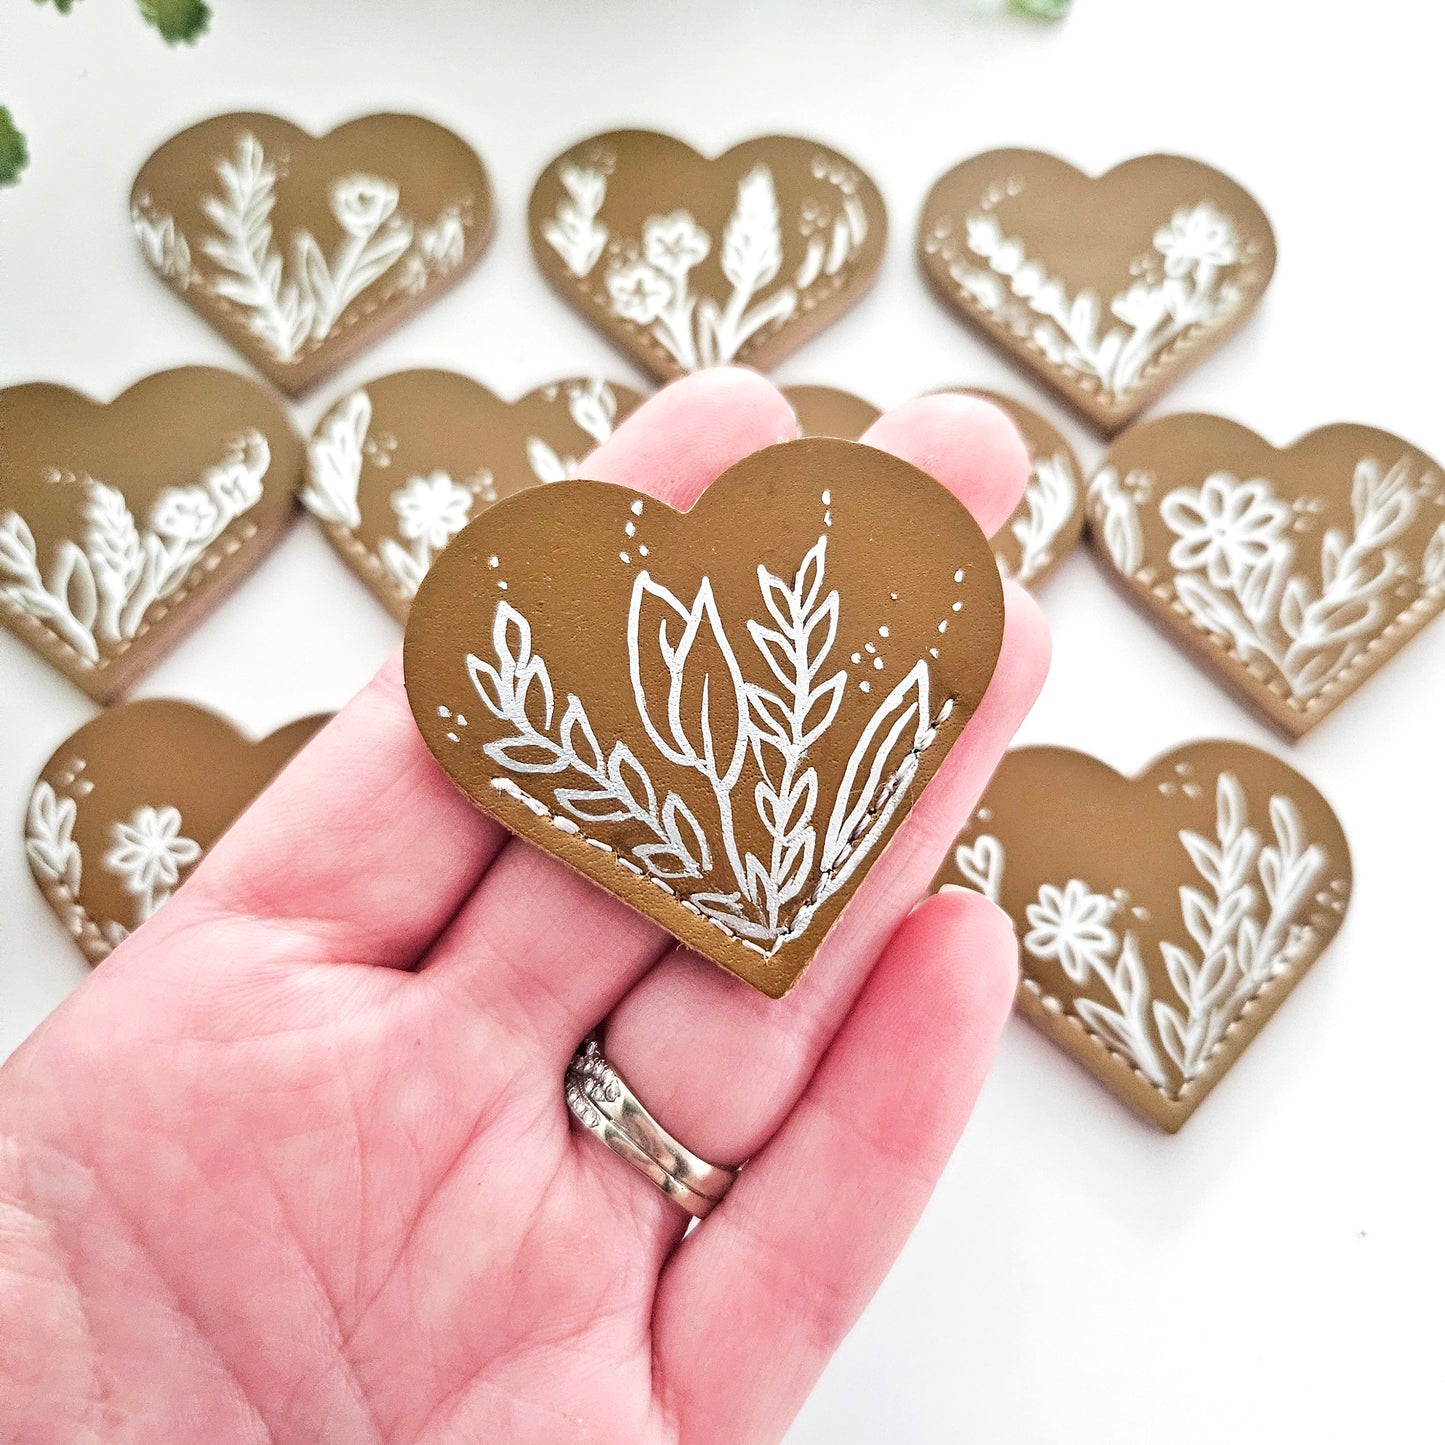 Leather Heart Bookmarks with Exquisite Hand-Drawn Metallic Botanical Designs for book lovers.